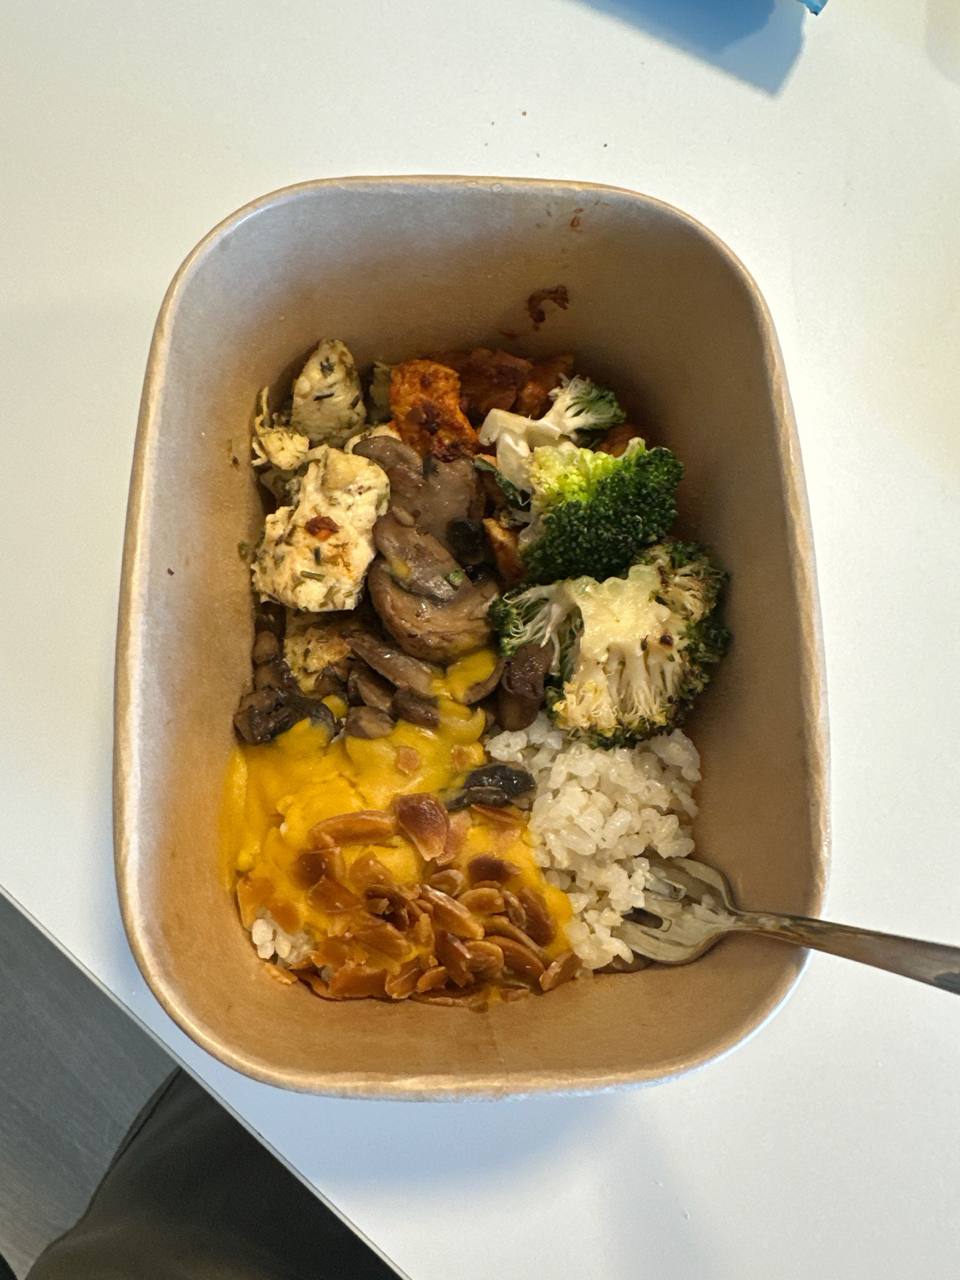 Custom Prepared Bowl With White Rice, Grilled Chicken, Broccoli, Mushrooms, And Cheese Sauce